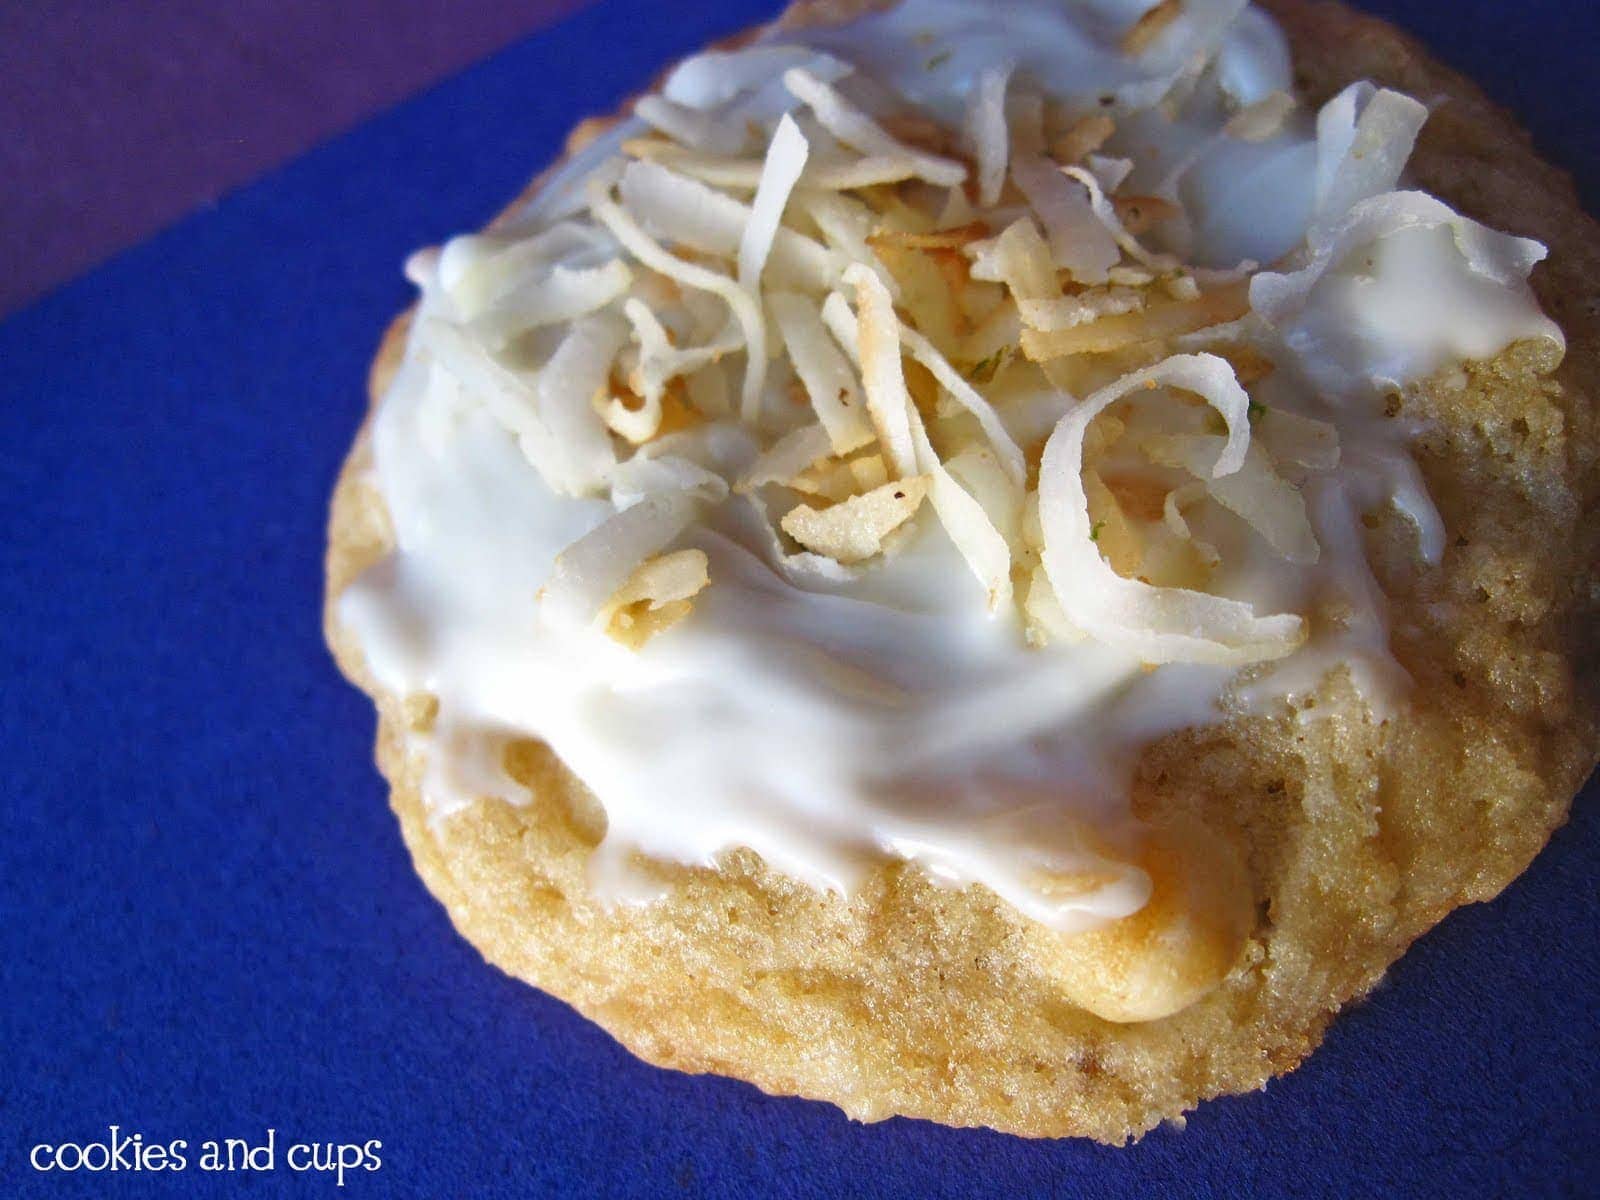 Close-up view of a Coconut Lime cookie with frosting and shredded coconut